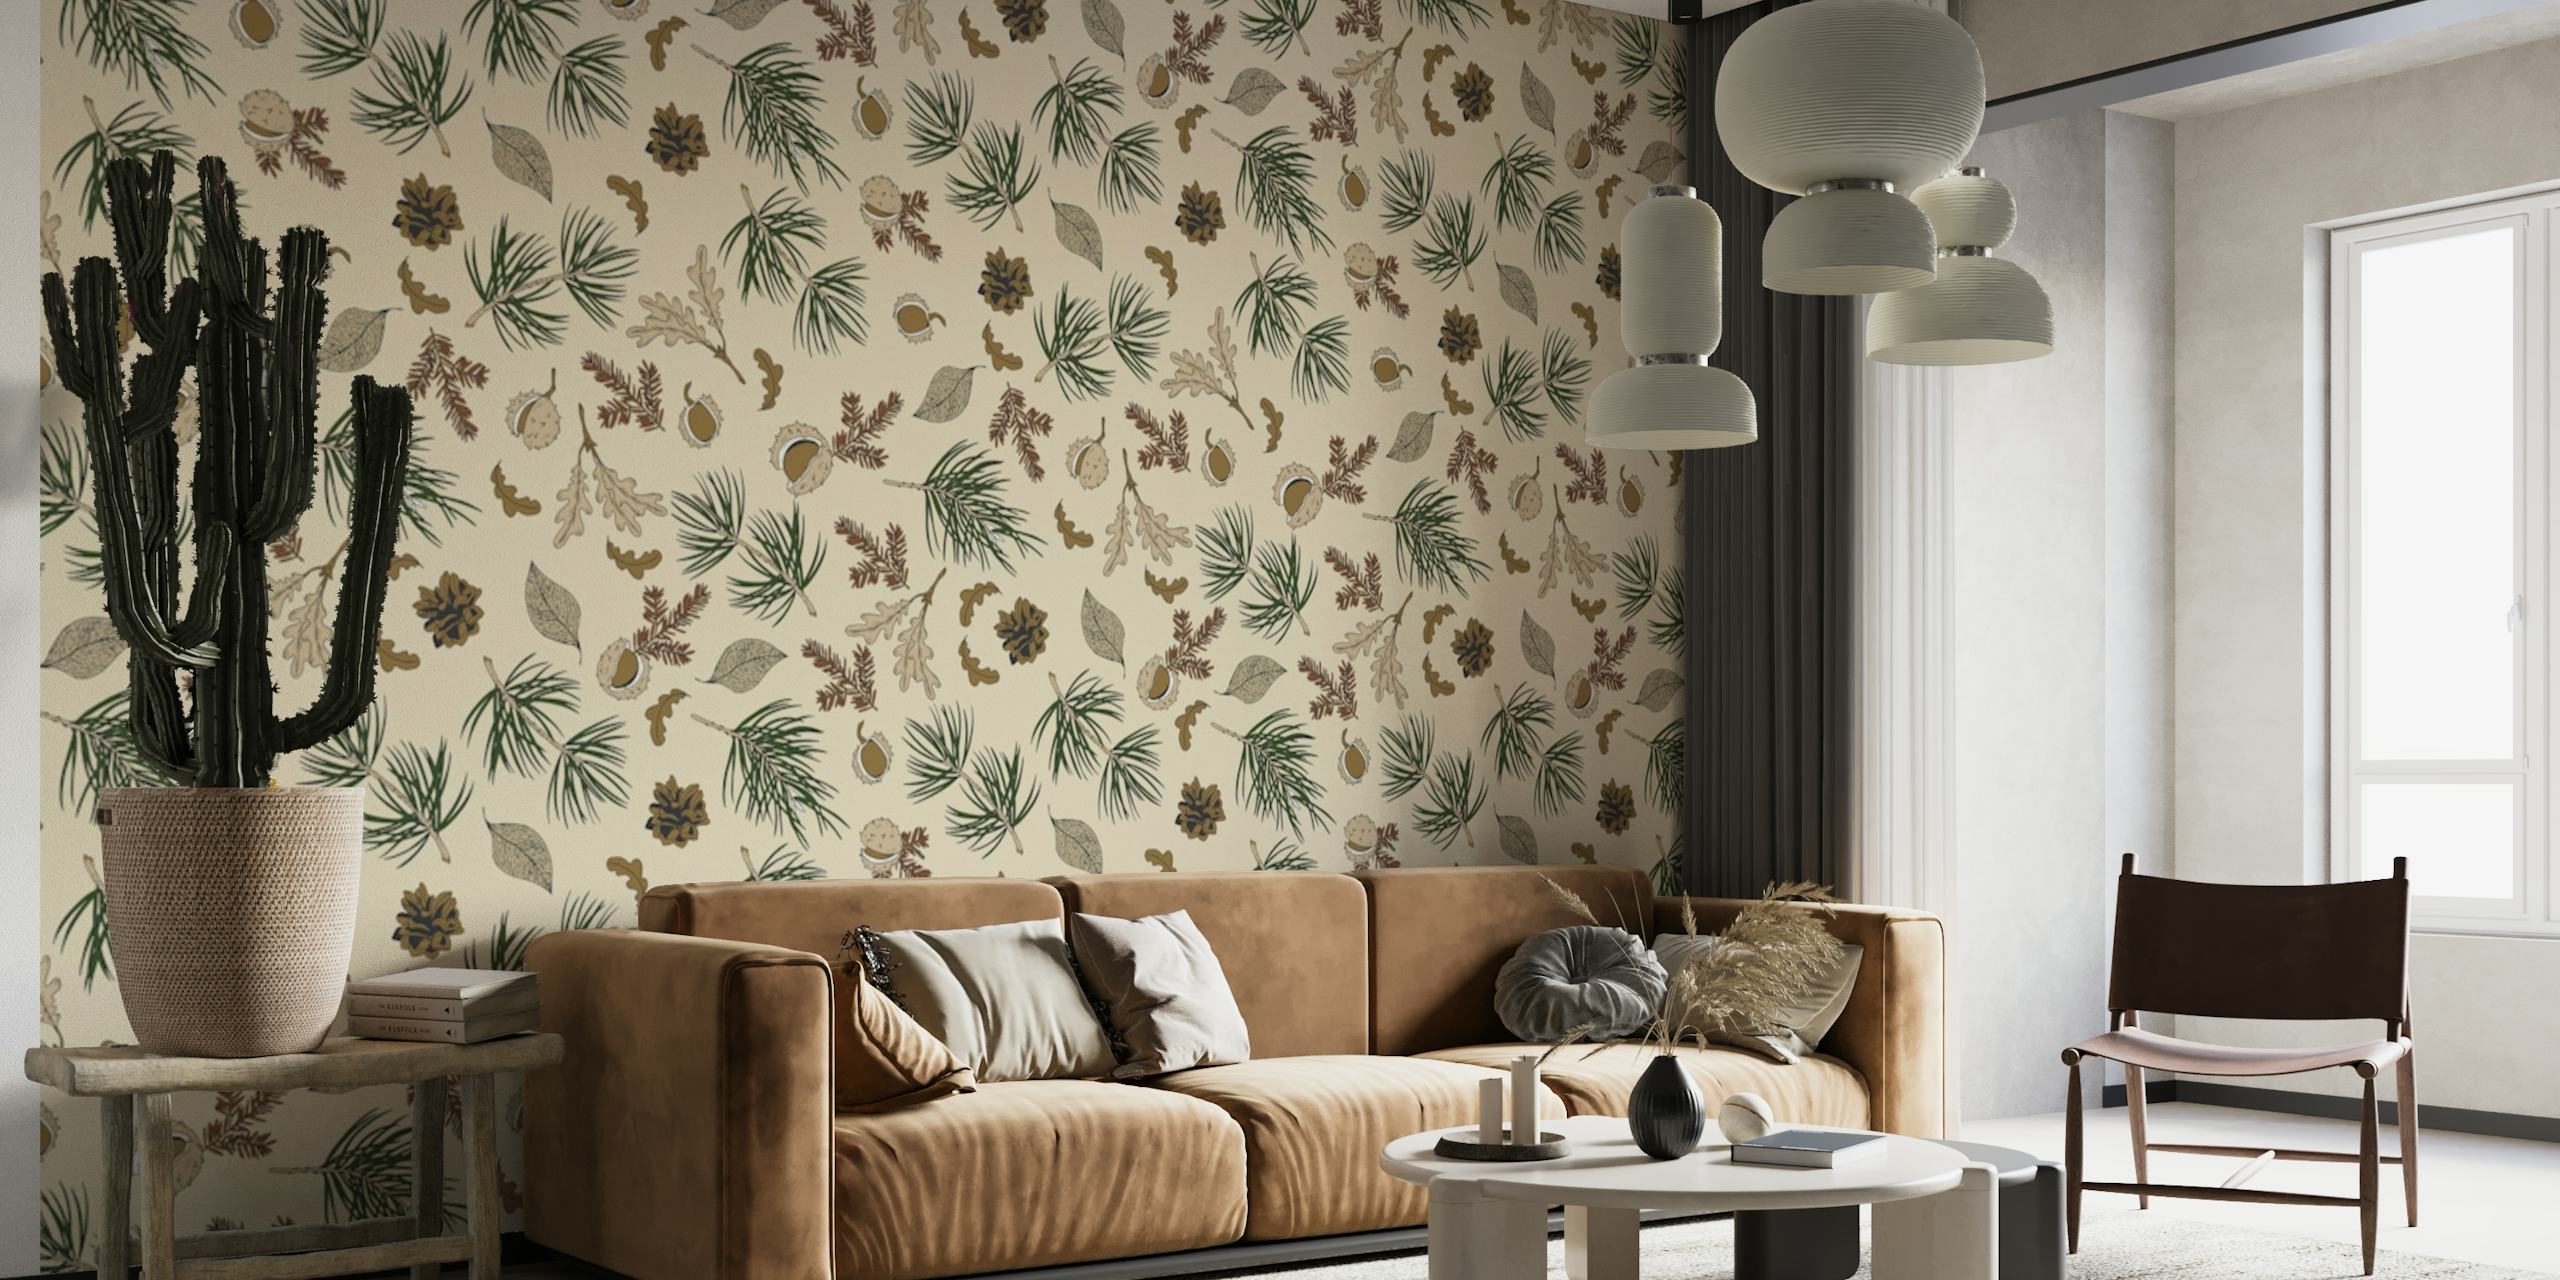 Autumnal wall mural with leaves, pine cones, and acorns pattern